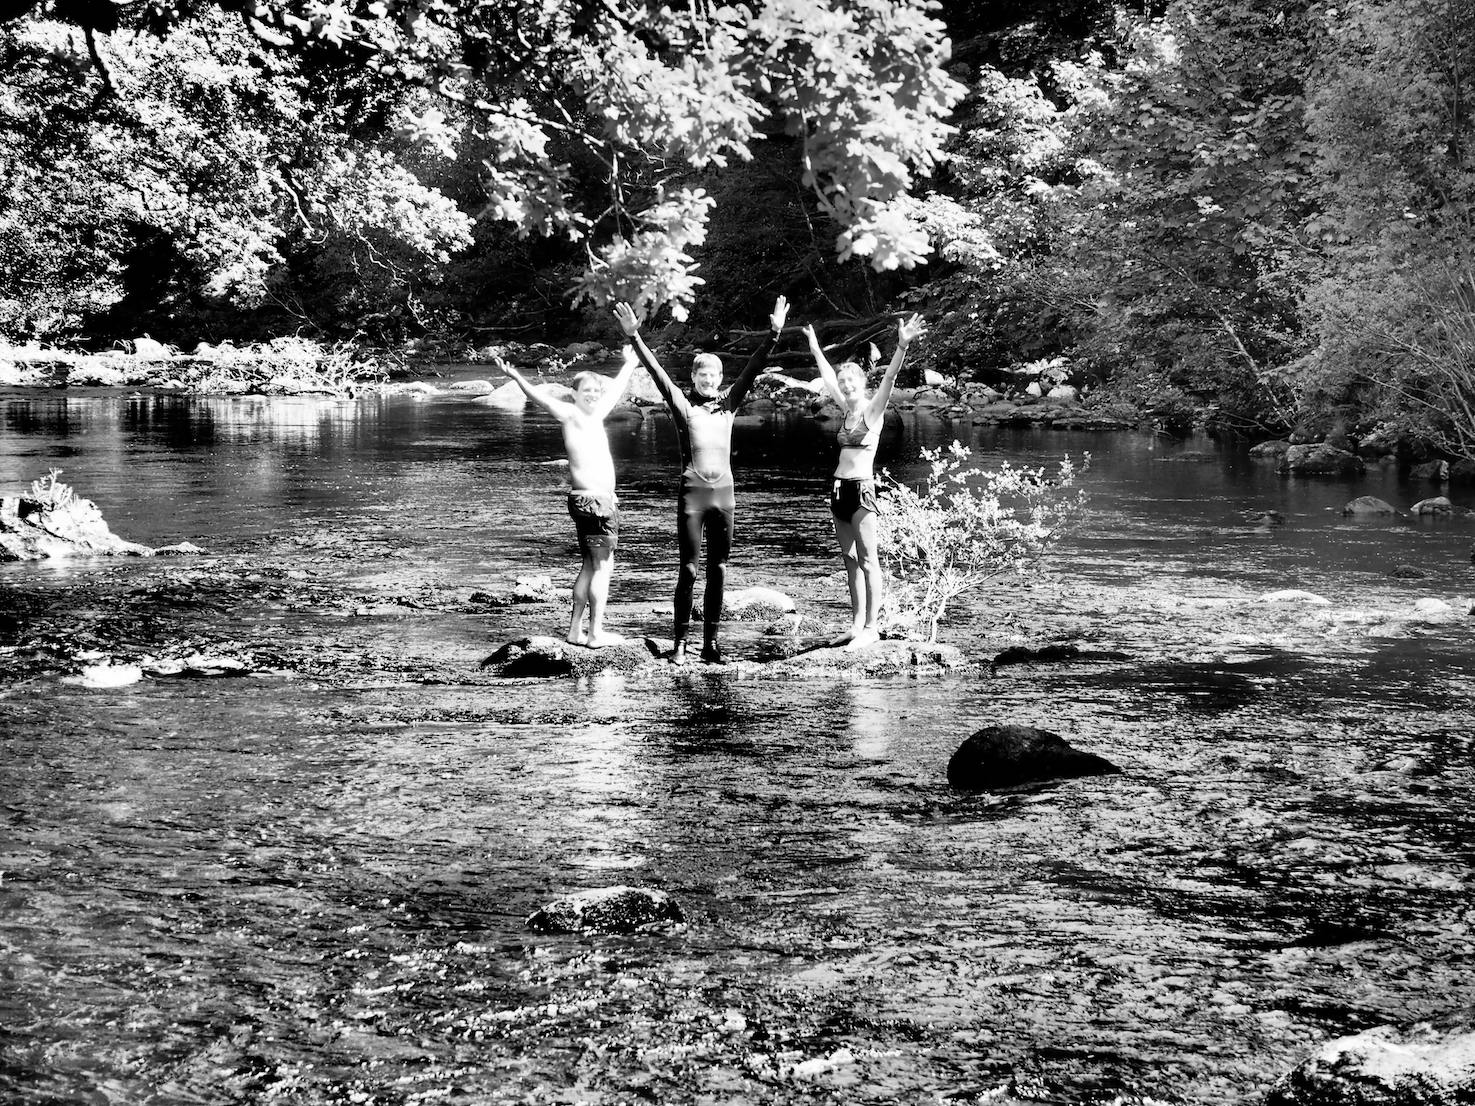  The joy of the river swimmers  Steve, Caspar and Ali 